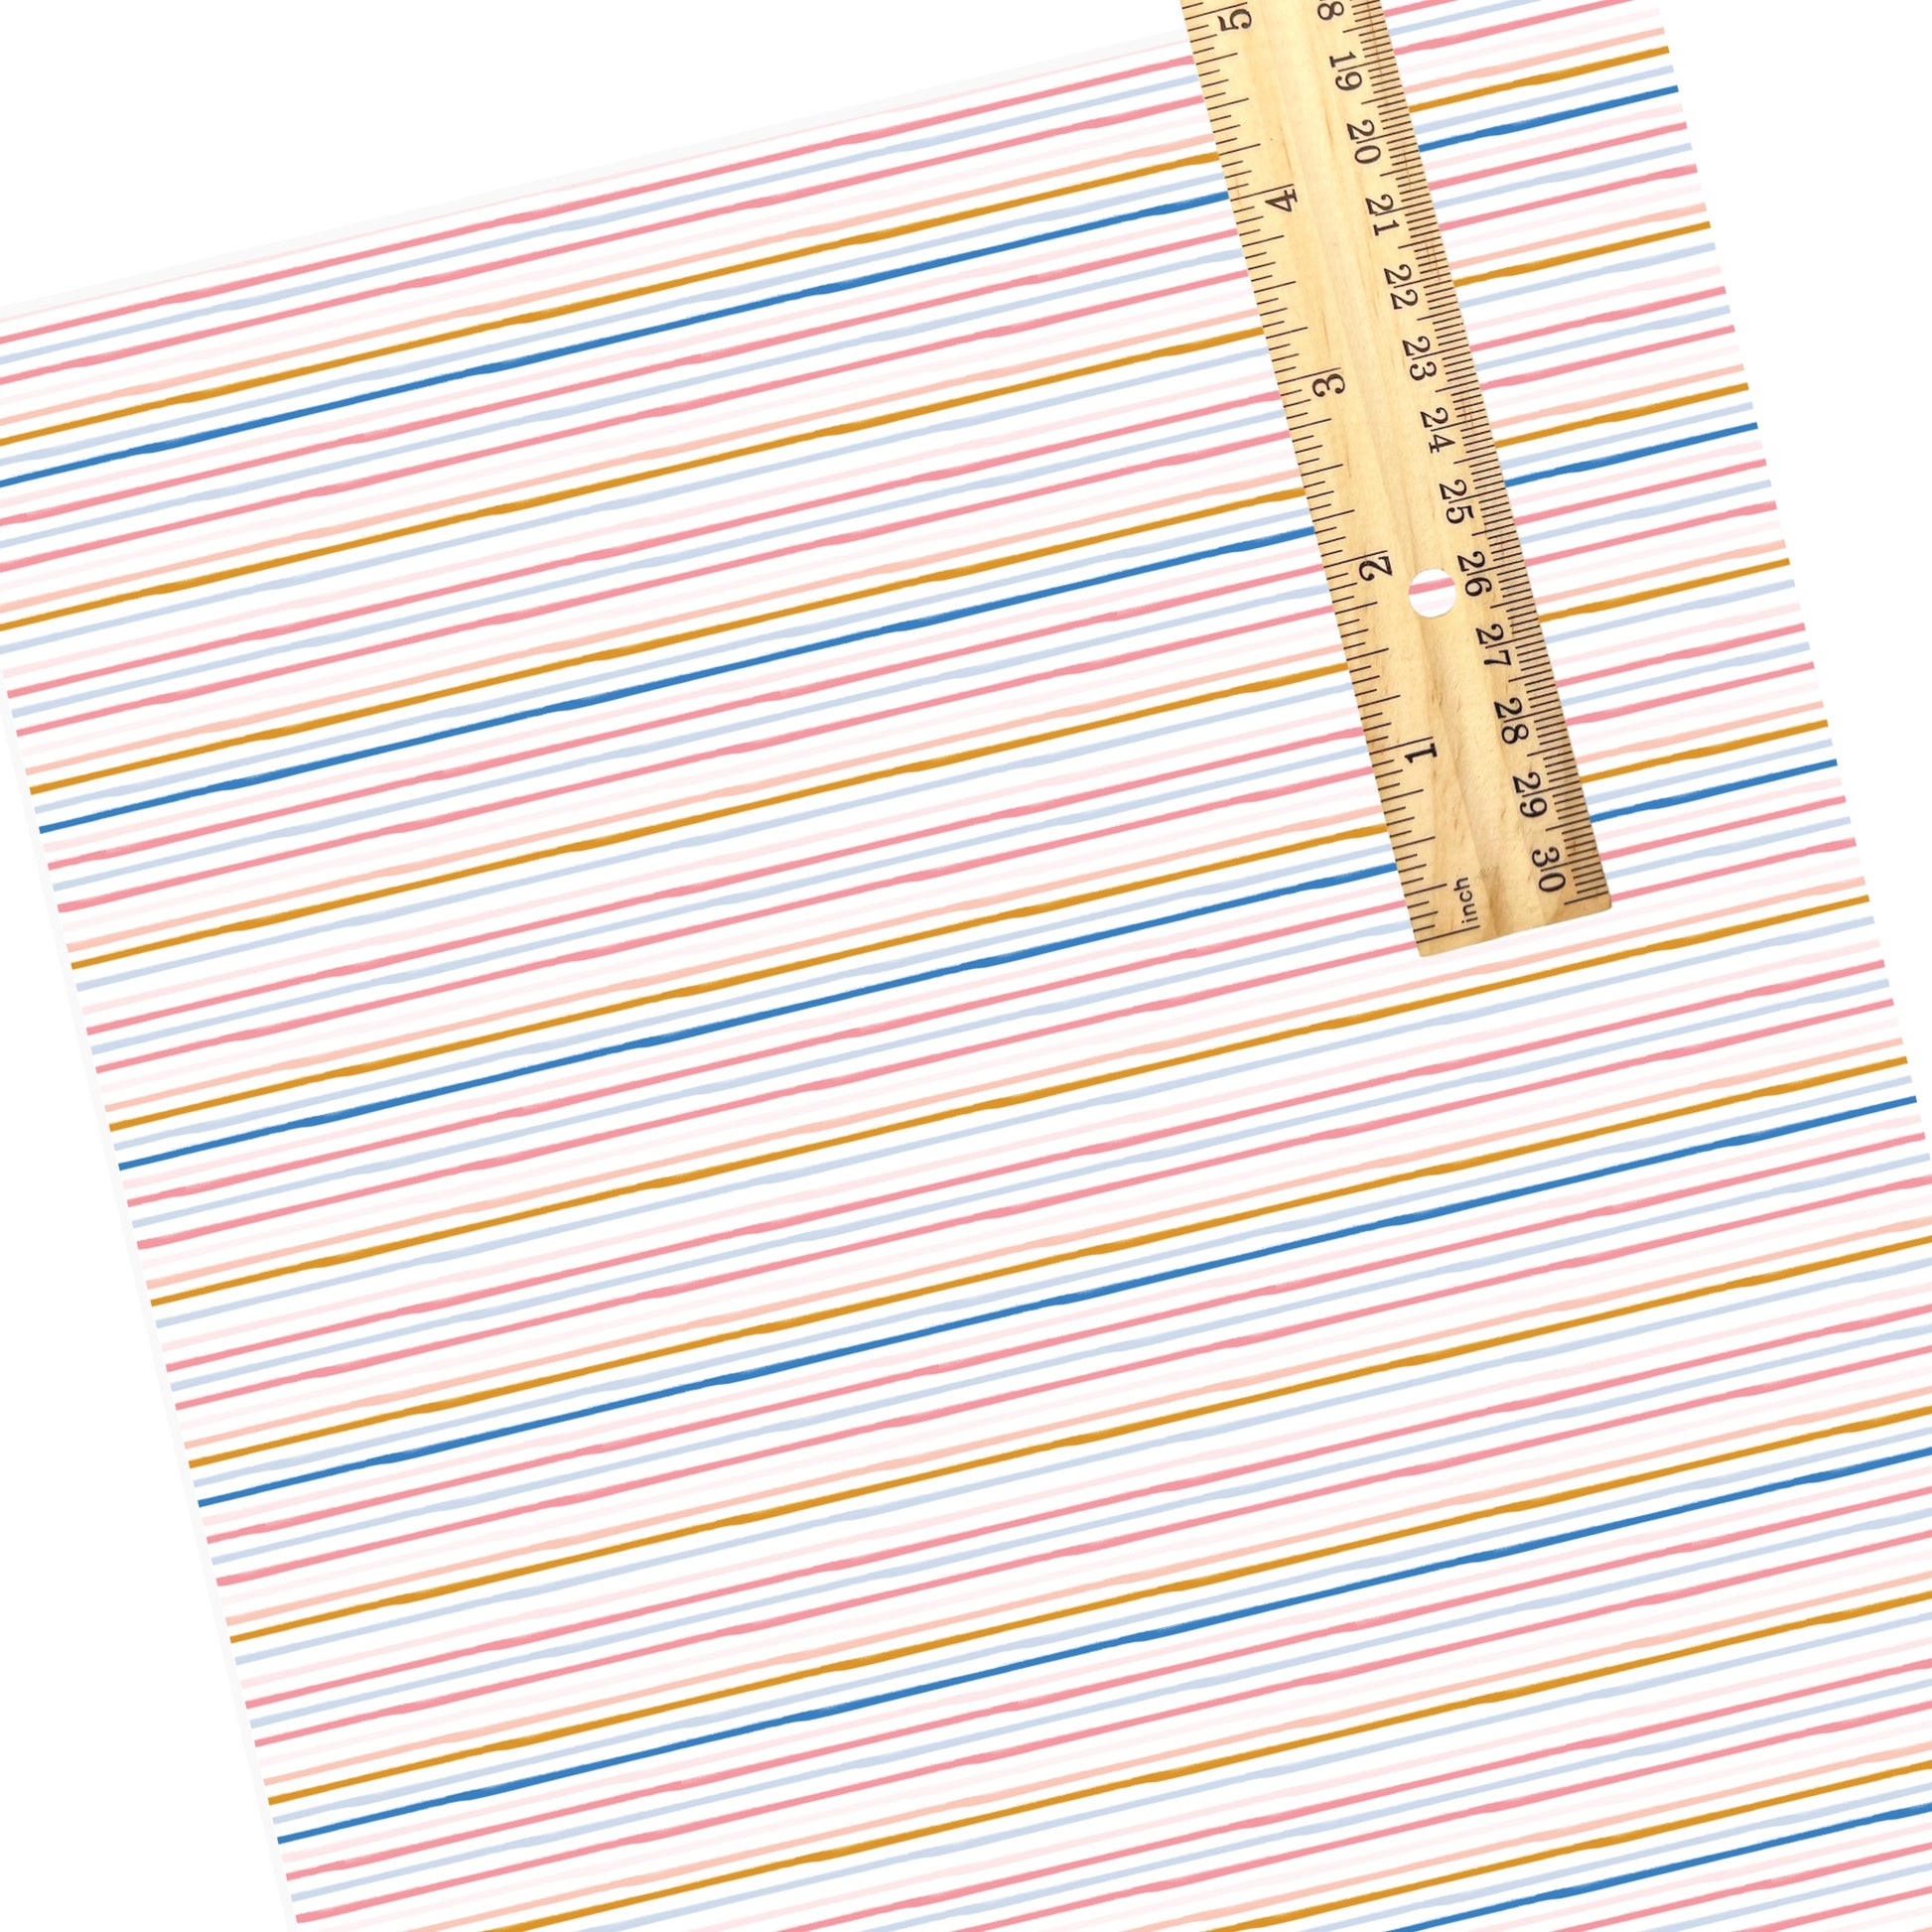 These summer faux leather sheets contain the following design elements: multi colored stripes on white. Our CPSIA compliant faux leather sheets or rolls can be used for all types of crafting projects.